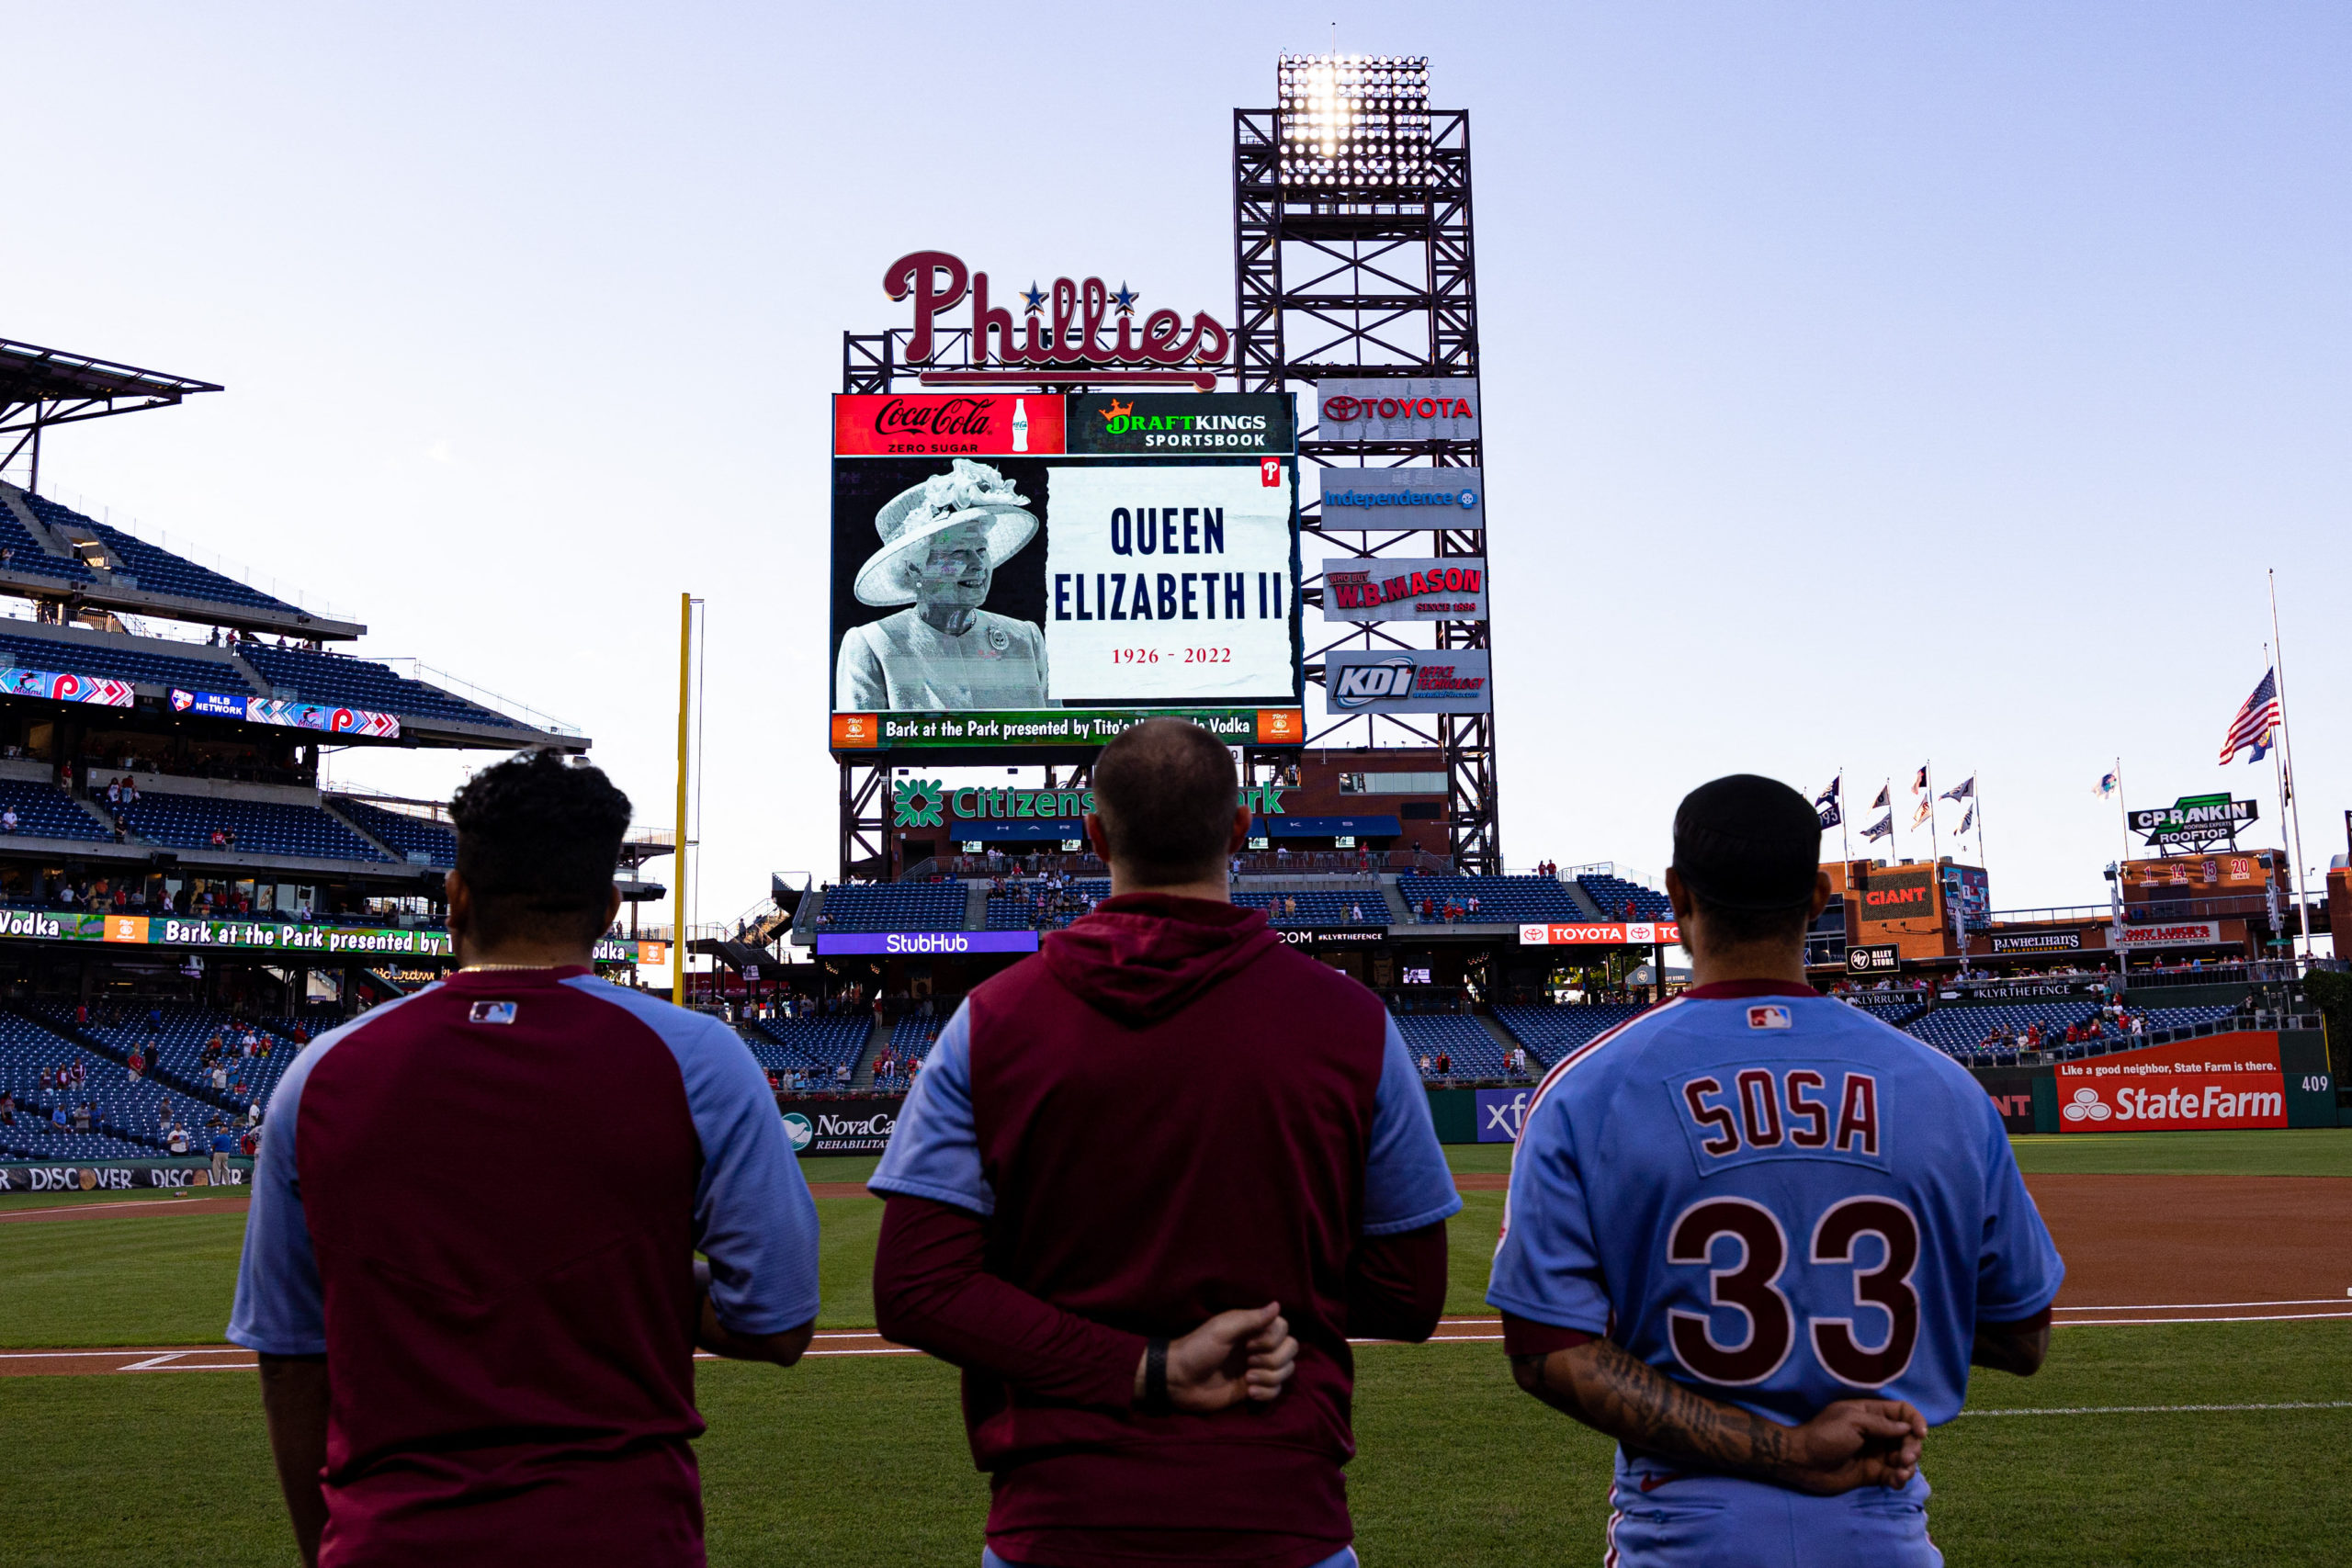 Sep 8, 2022; Philadelphia, Pennsylvania, USA; Players and fans stand for a moment of silence in honor of the late Queen Elizabeth II before a game between the Philadelphia Phillies and the Miami Marlins at Citizens Bank Park.